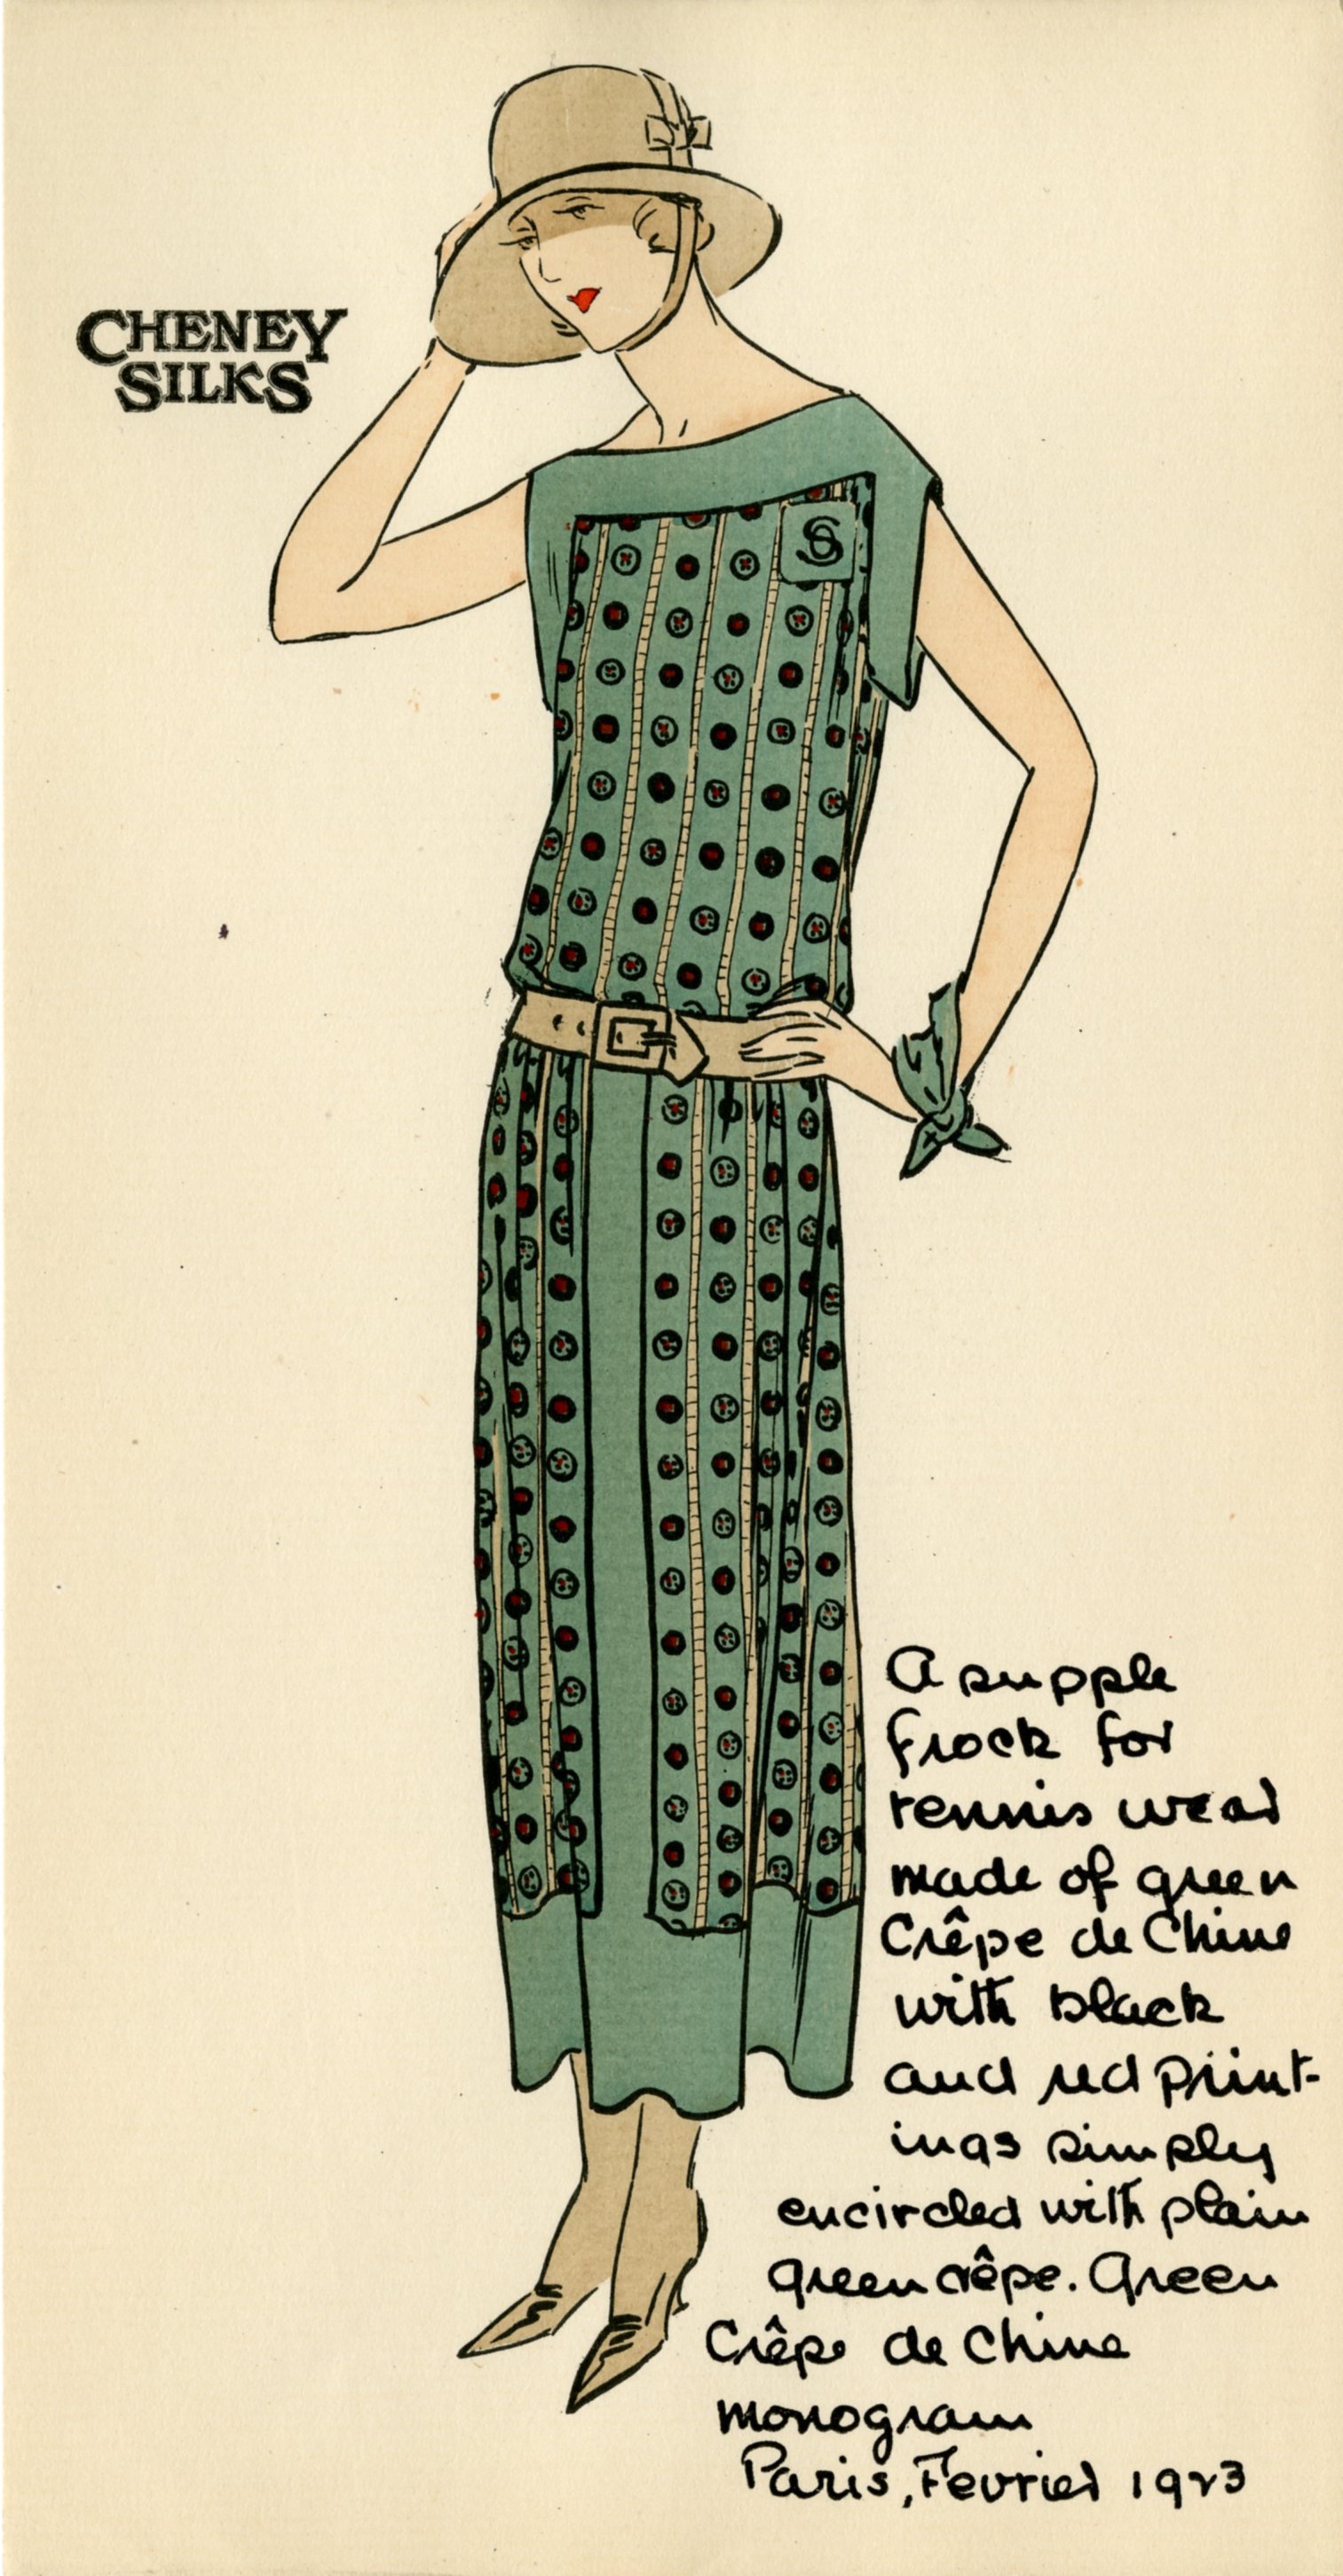 Drawing of a silk dress using fabric from the Cheney Brothers Silk Manufacturing Company, ca. 1920s